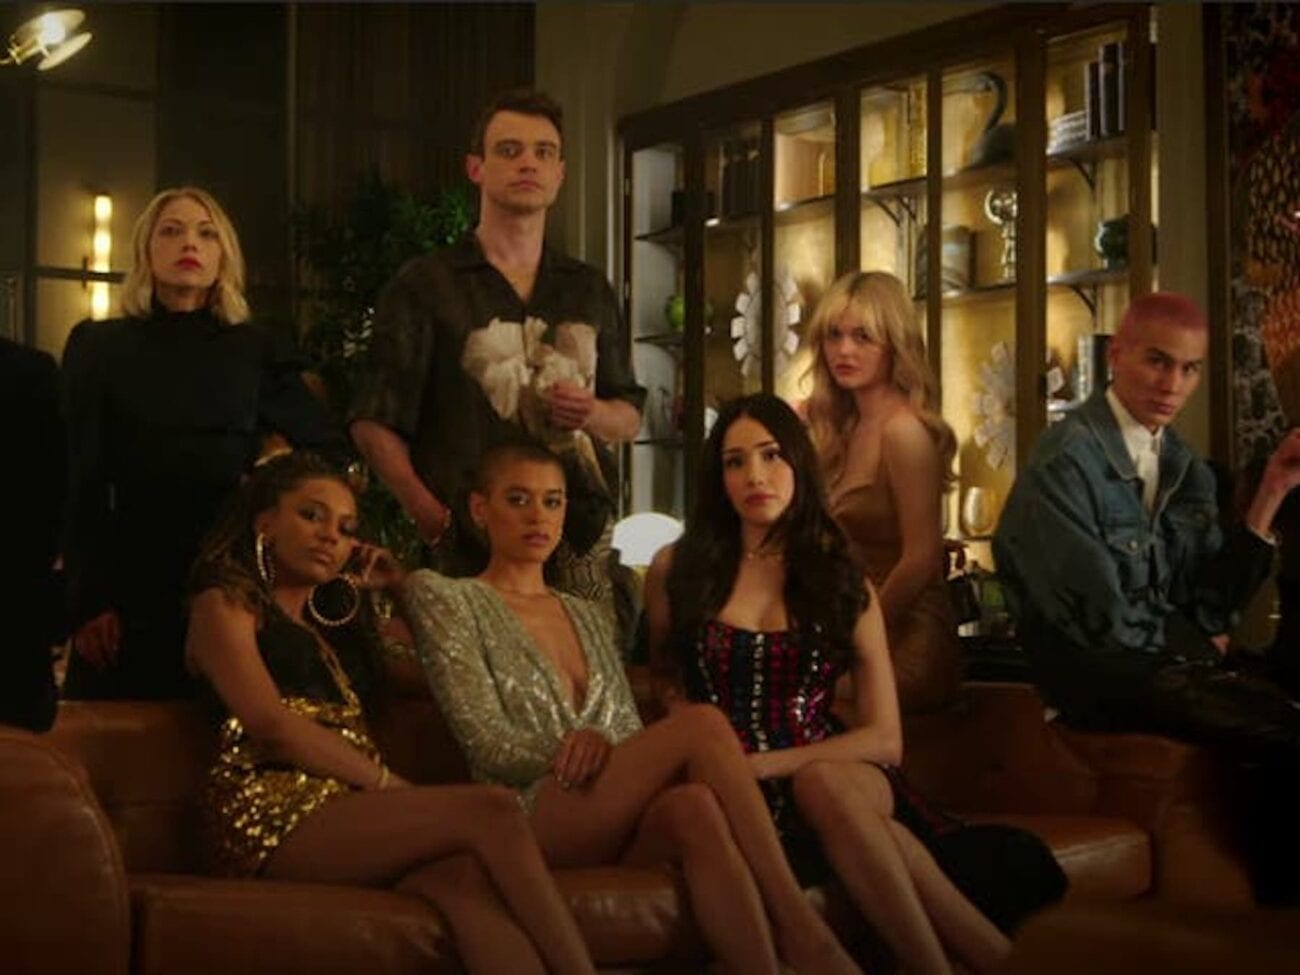 'Gossip Girl' drops a teaser to give fans a much needed look at the reboot in action. XOXO your way in to see what we've learned from it.